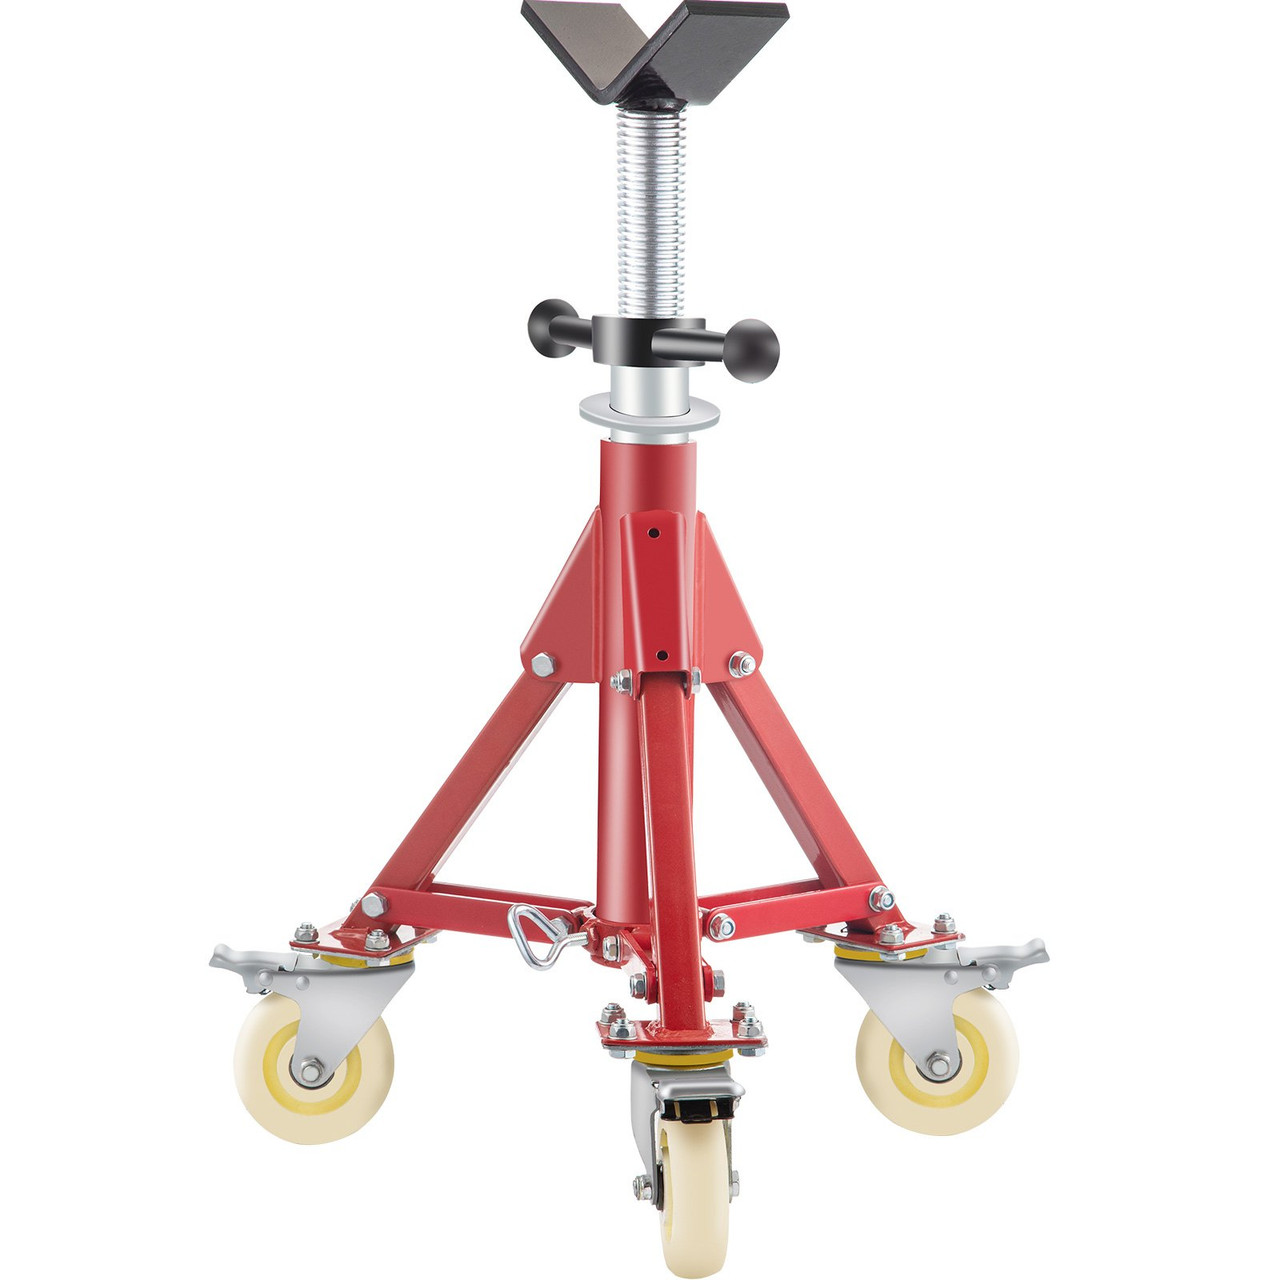 Pipe Stand, Pipe Jack Stand, V Head Pipe Stand Adjustable Height 20-37 Inch, Pipe Jack Stands with Casters 882 LB, Folding Portable Pipe Stands 1/8 to 12 Inch Pipe Supporting, Steel Jack Stand